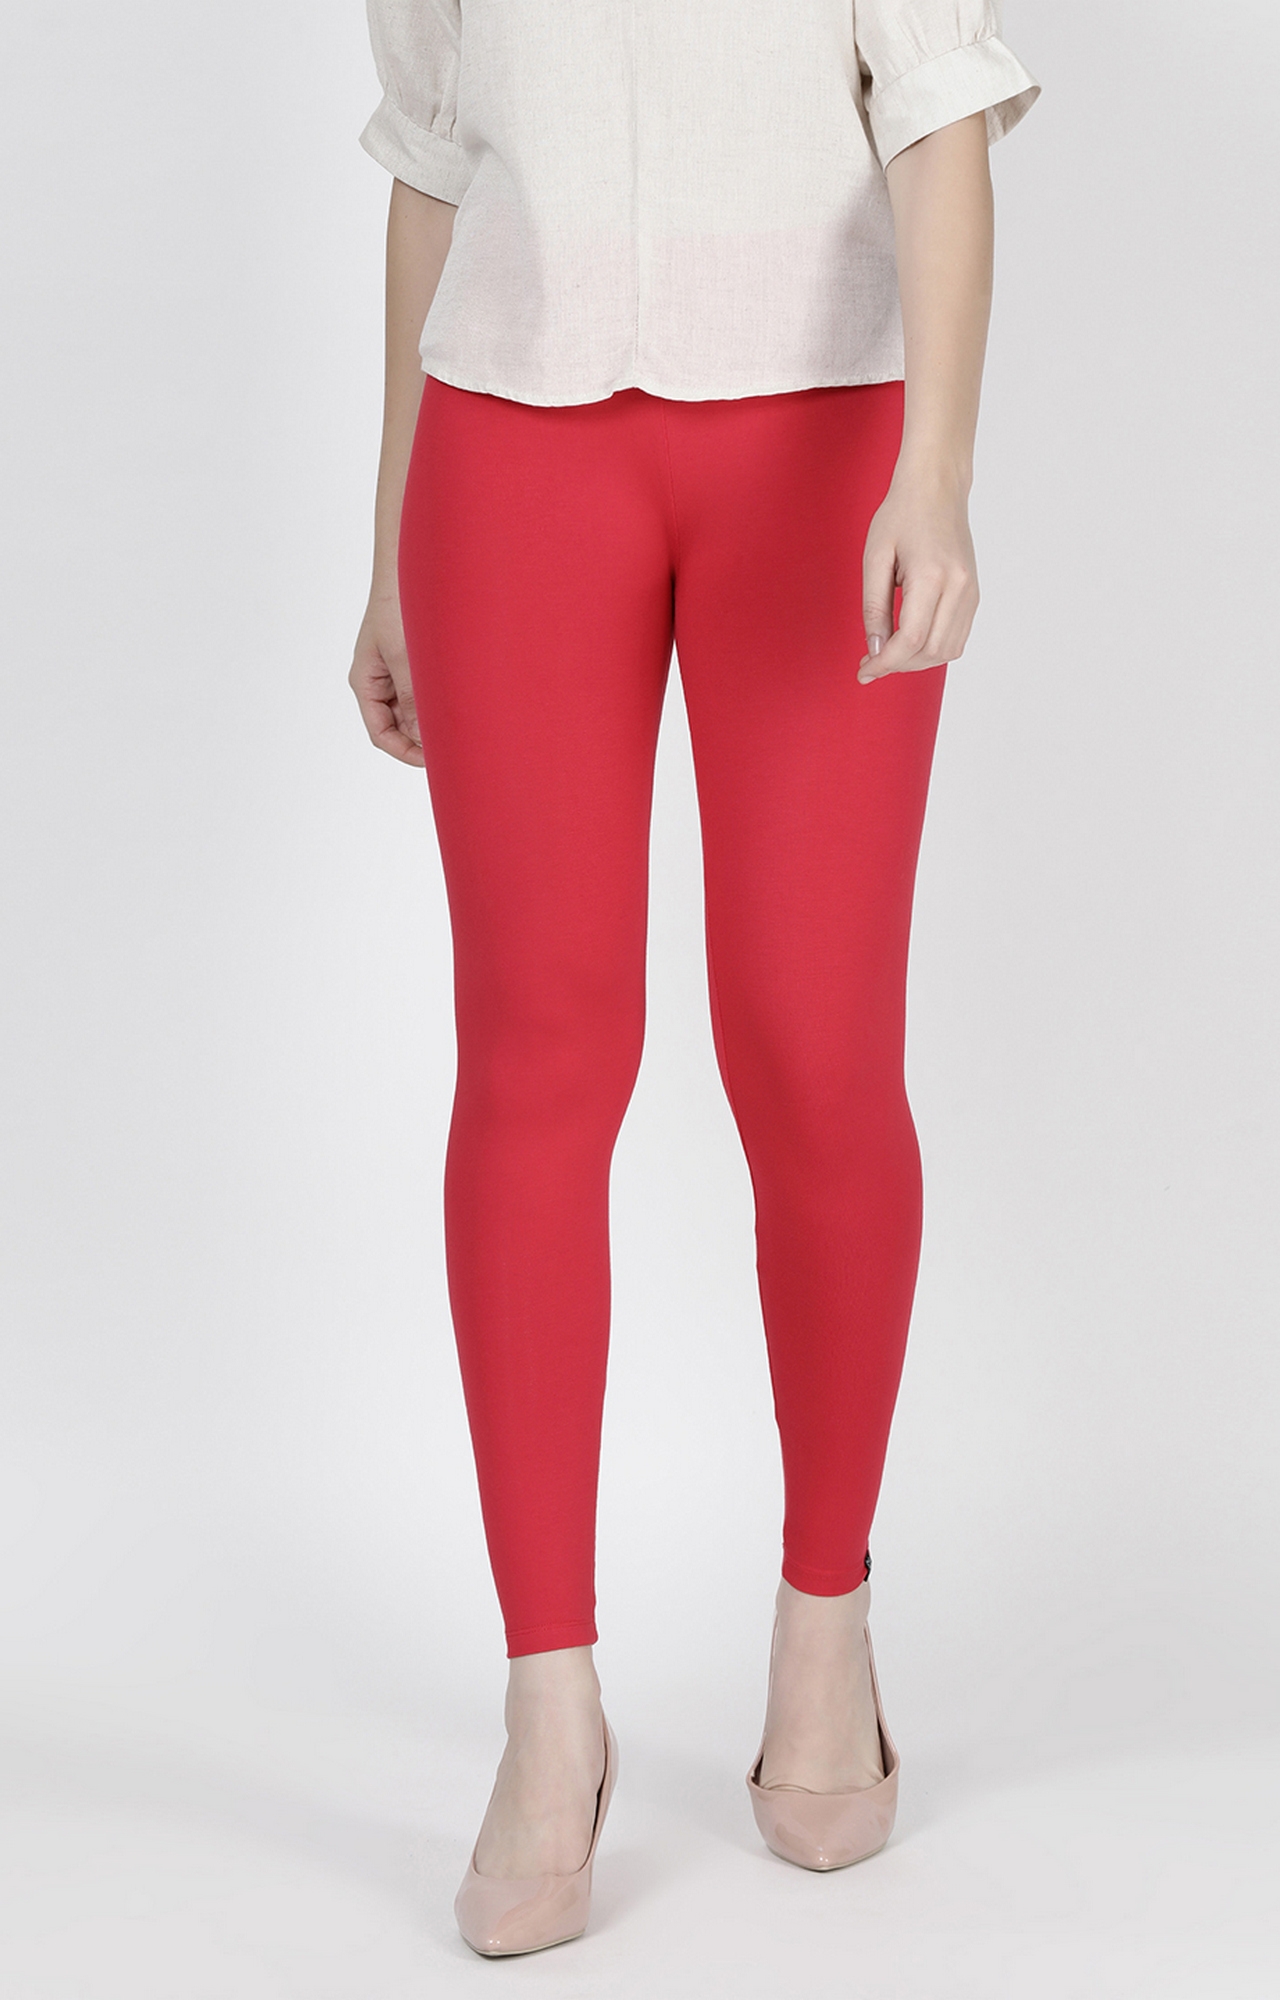 Twin Birds Fancy Legging - Get Best Price from Manufacturers & Suppliers in  India